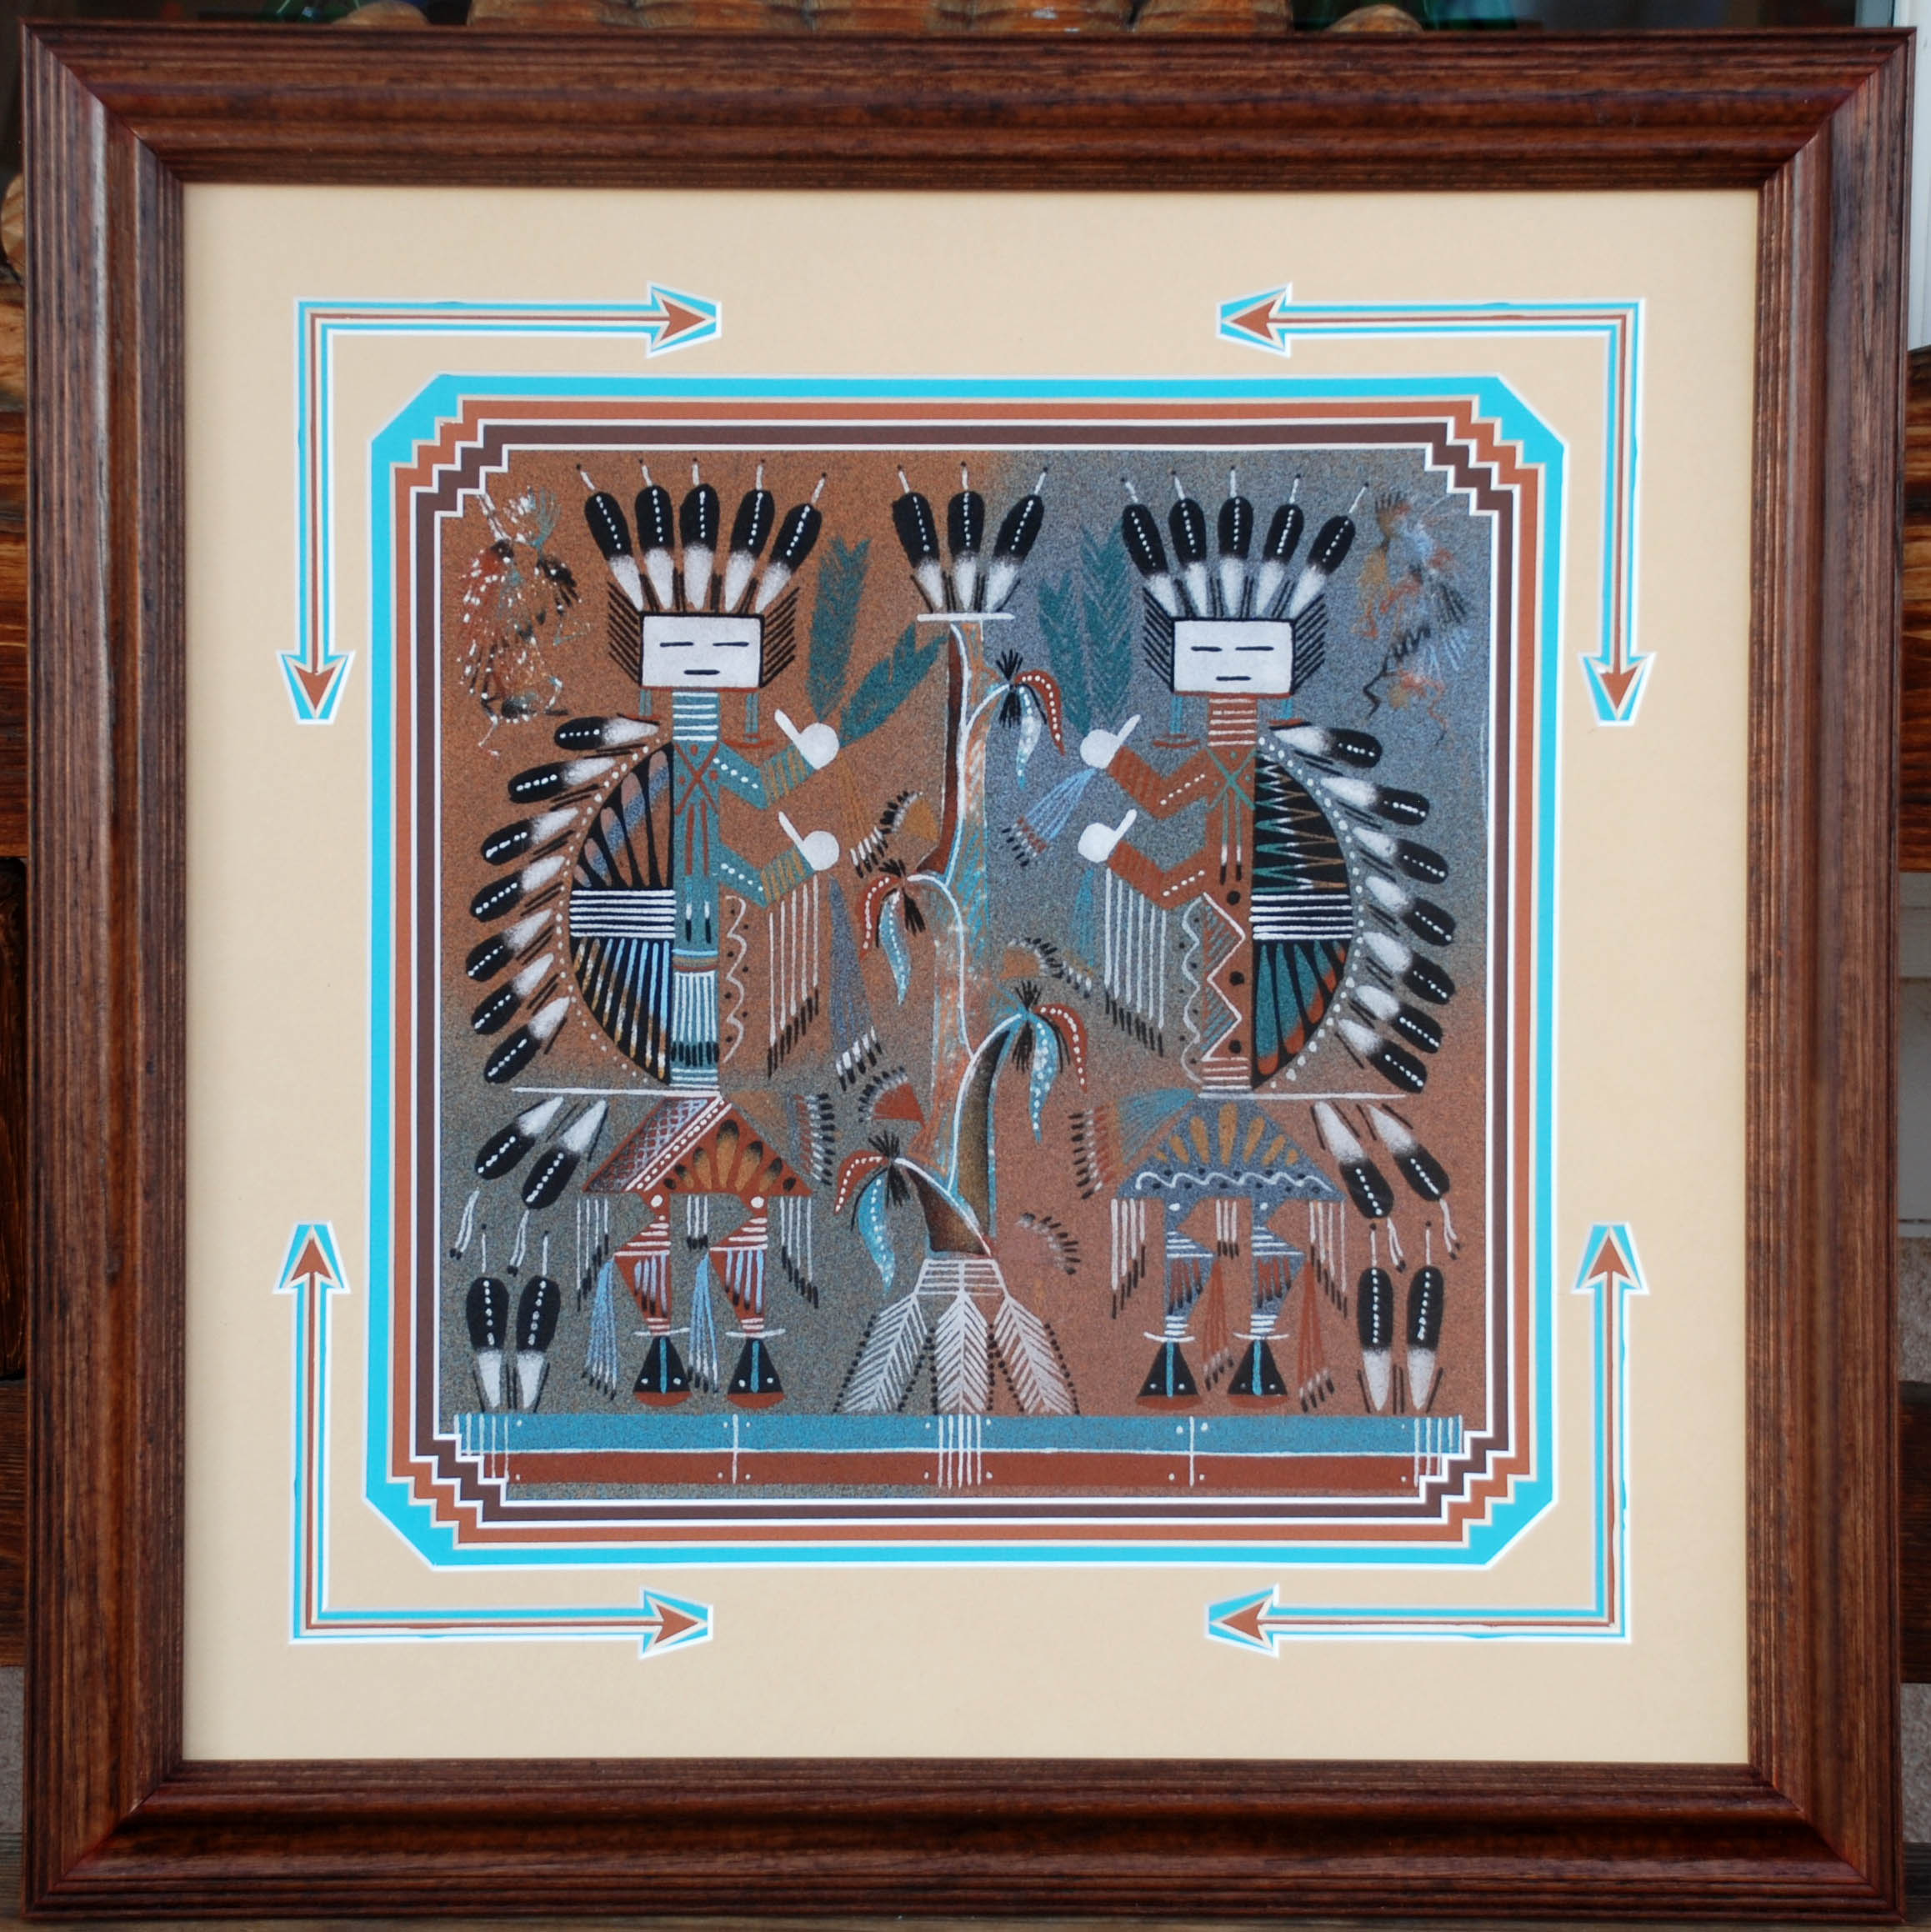 Orlando Myerson | Navajo Sandpainting | Penfield Gallery of Indian Arts | Albuquerque, New Mexico